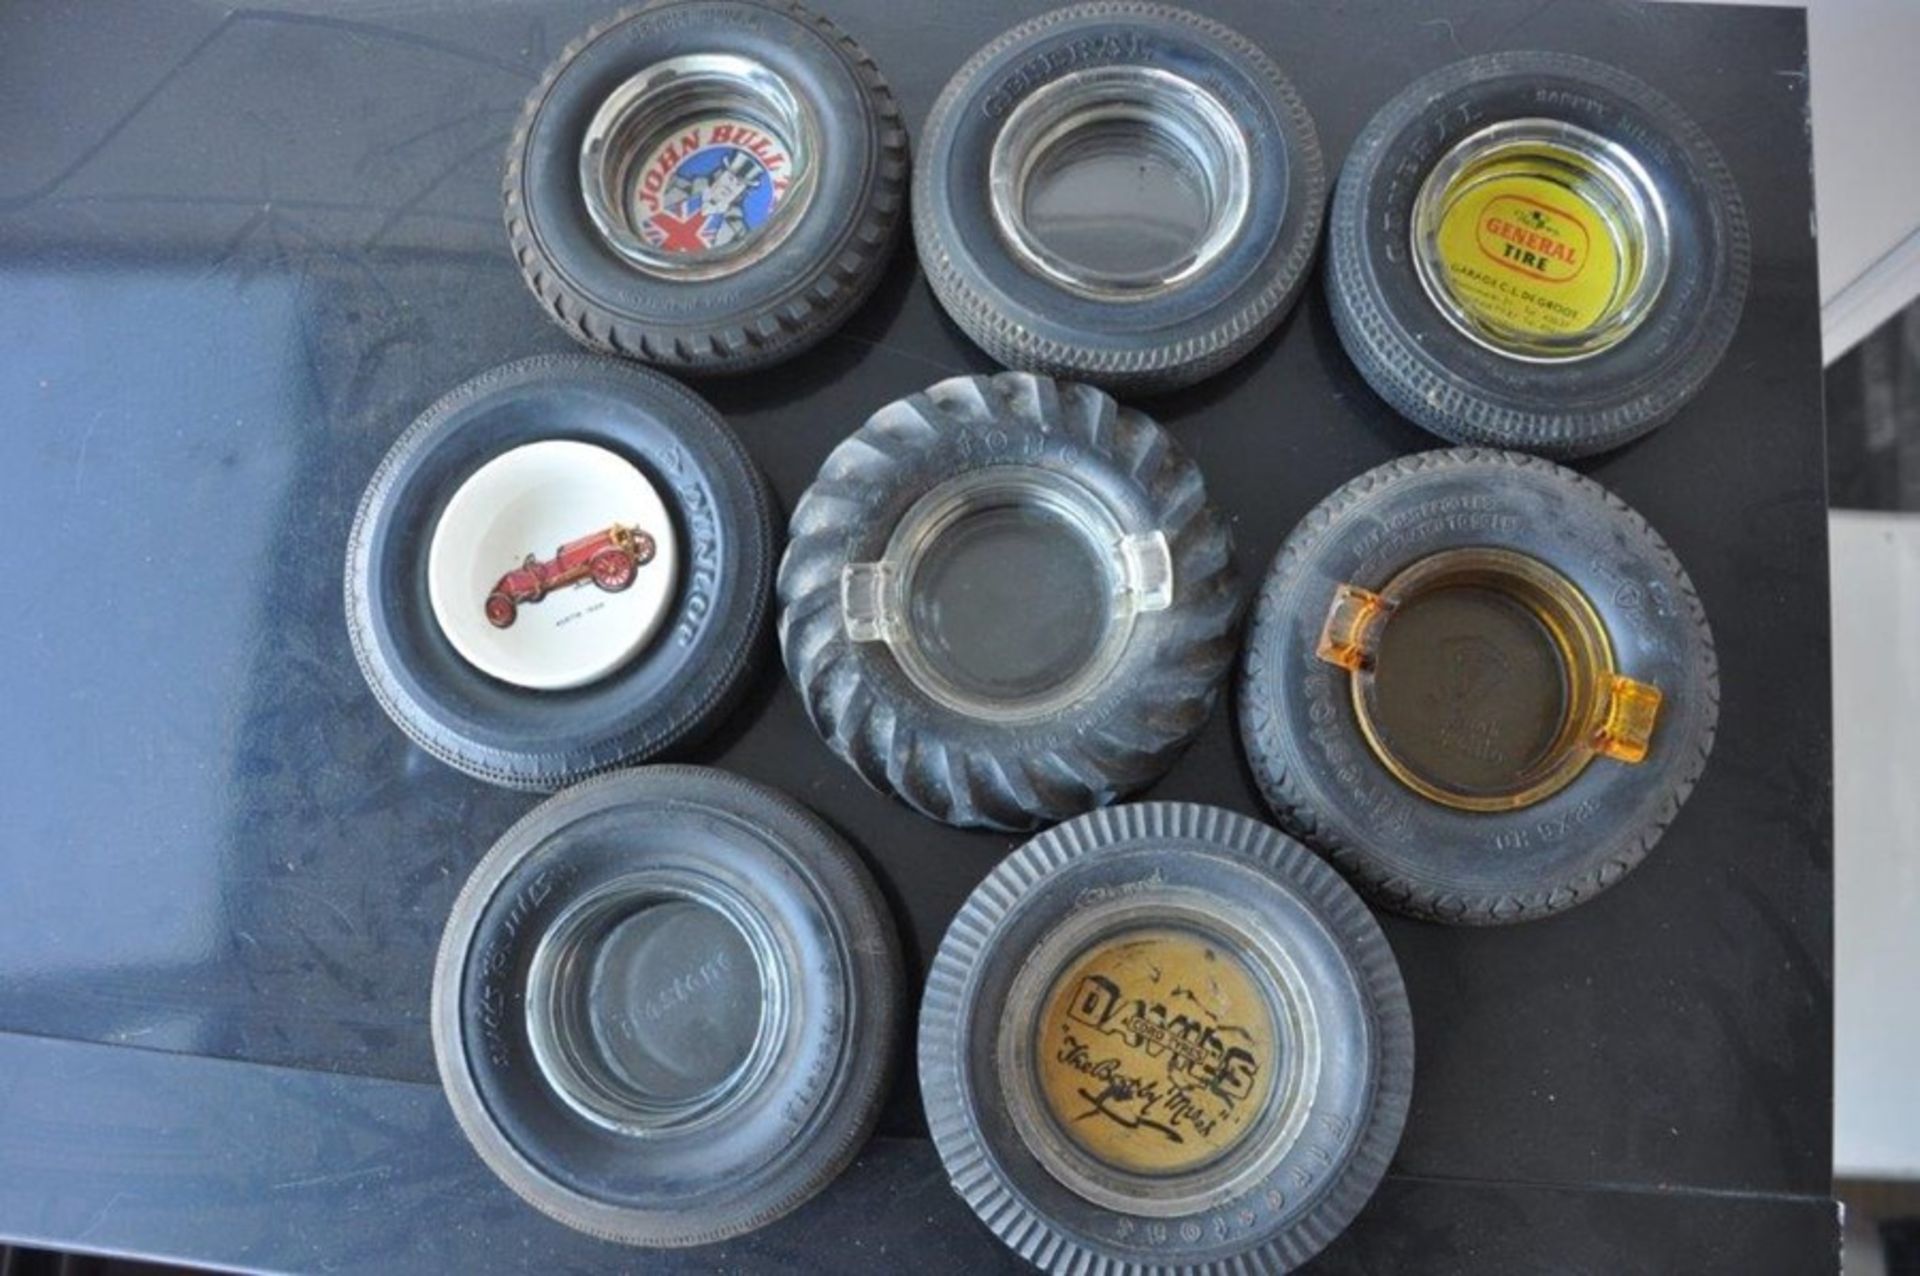 Lot Of 8 Commemorative Tyre Ash Trays Including 4x Firestone 2x General 1x Dunlop and 1x John Bull